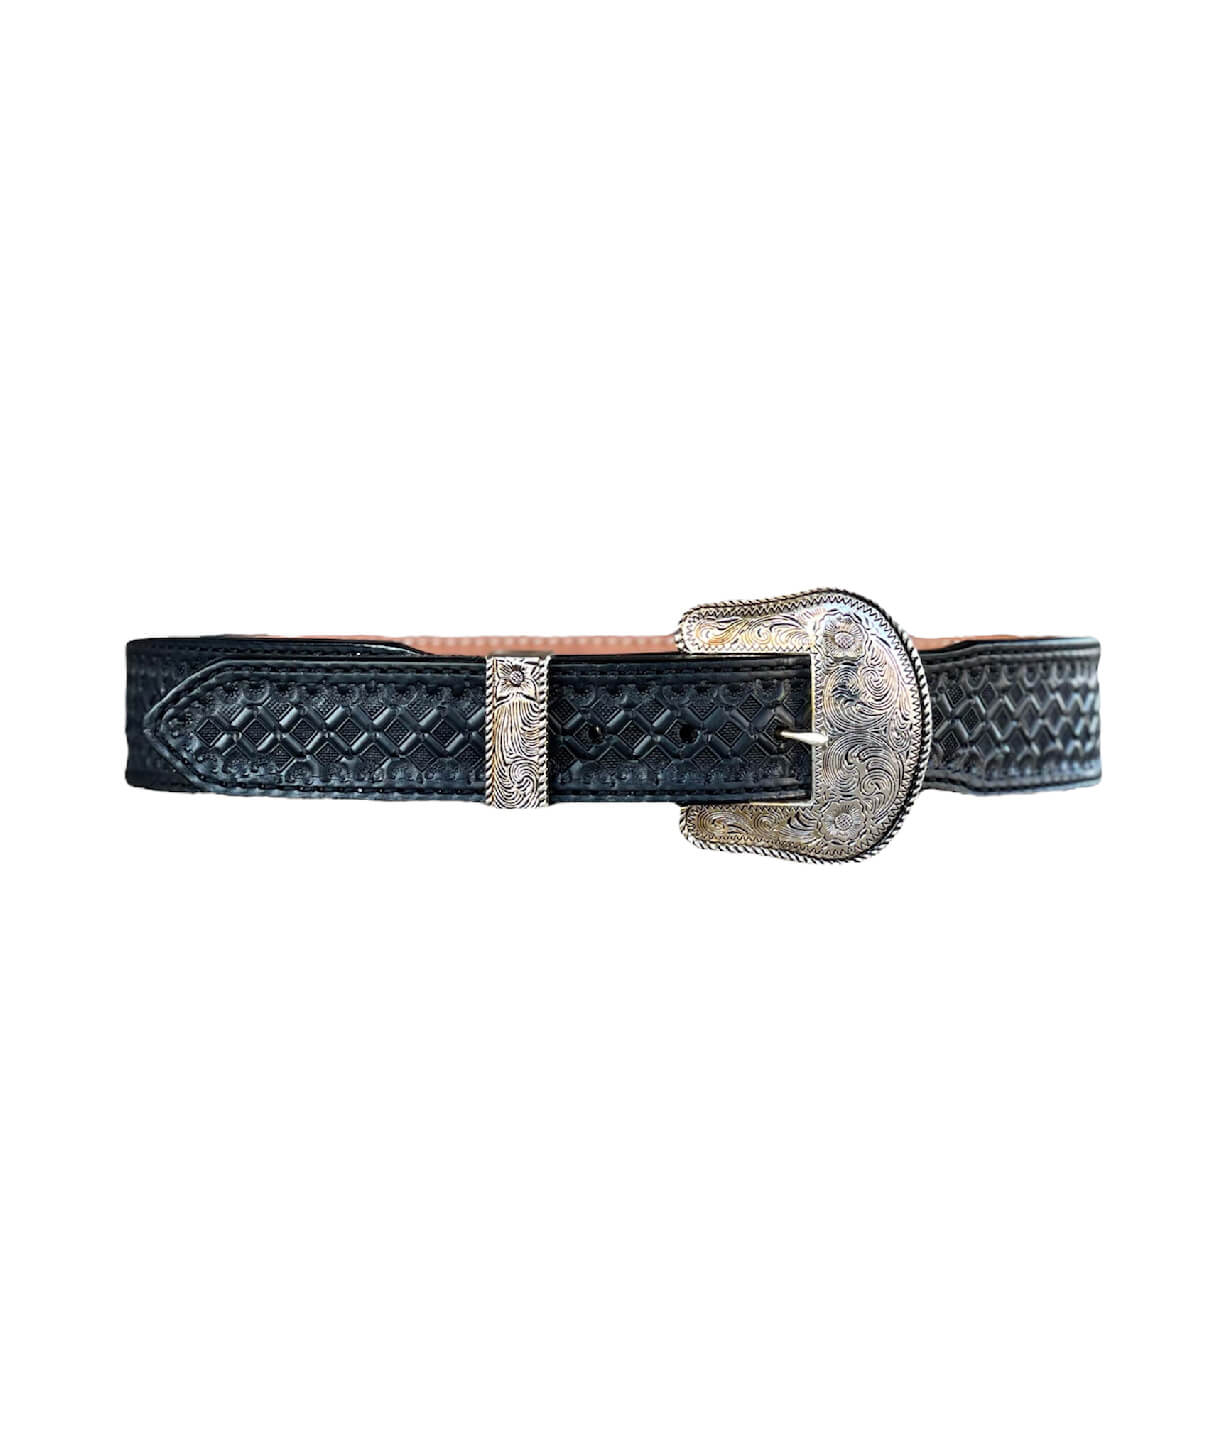 This is our TAPERED black leather belt with waffle tooling. It comes with a silver belt buckle and silver belt loop.